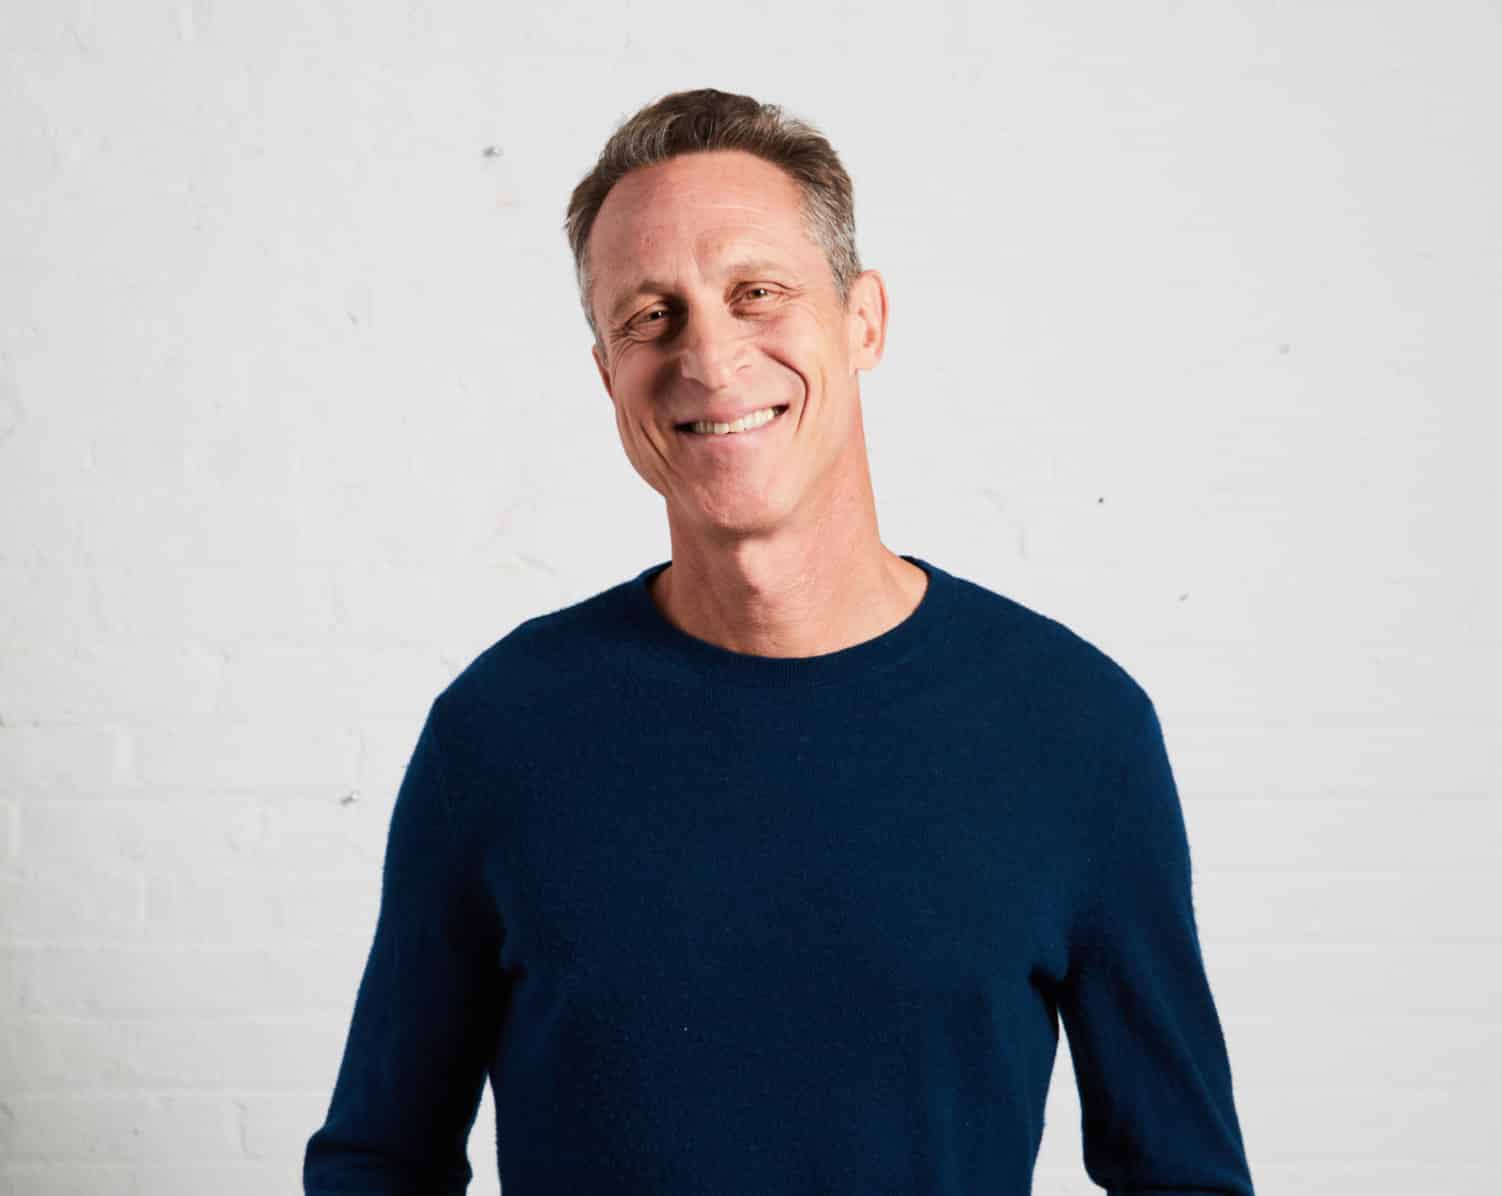 Food Fight! Fixes for Better Health and a Sustainable World – Dr. Mark Hyman – #672